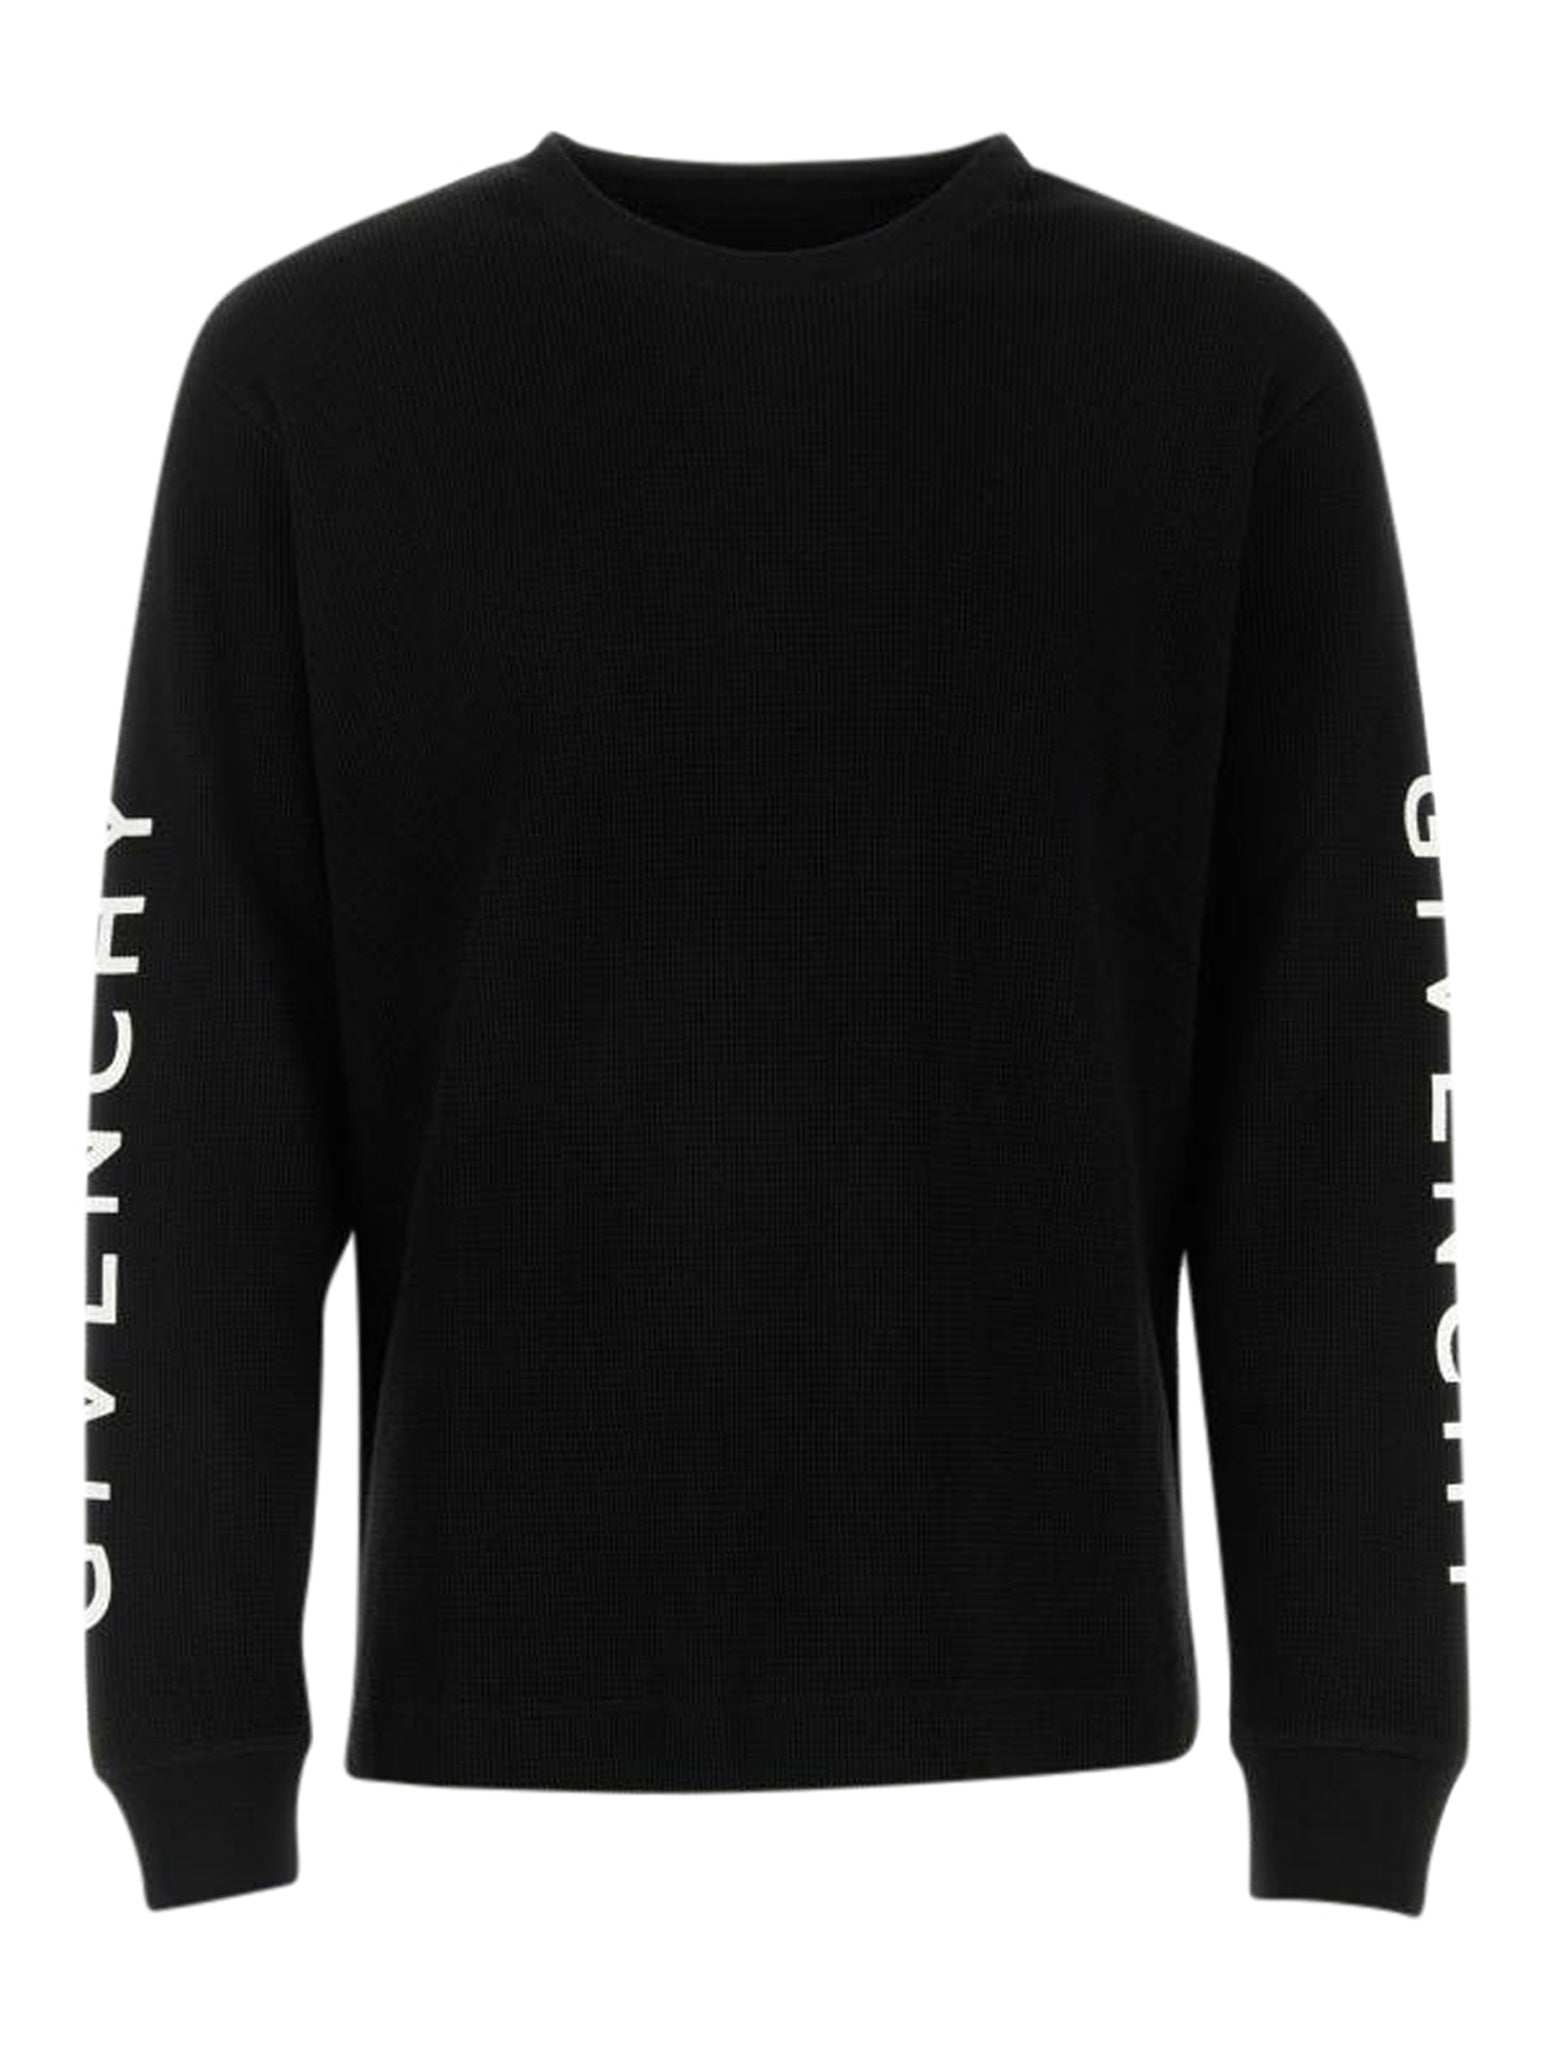 CLASSIC FIT LONG SLEEVES T-SHIRT